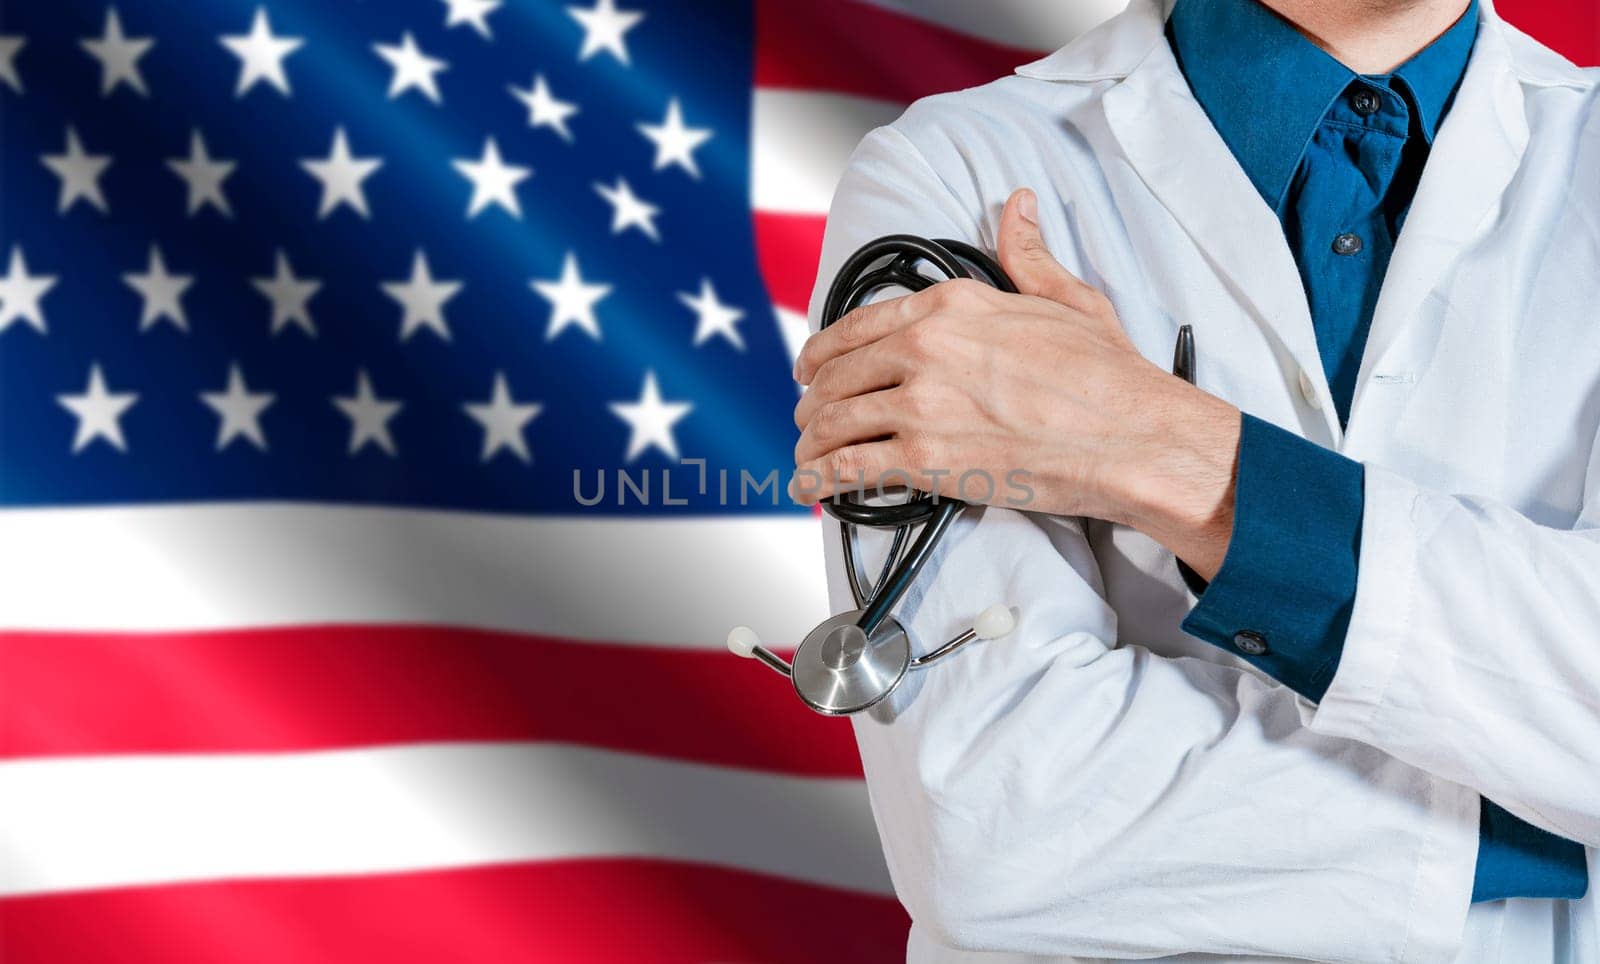 Doctor with stethoscope on USA flag. Health and care with the flag of United State. USA national health concept, Doctor arm holding stethoscope on USA flag